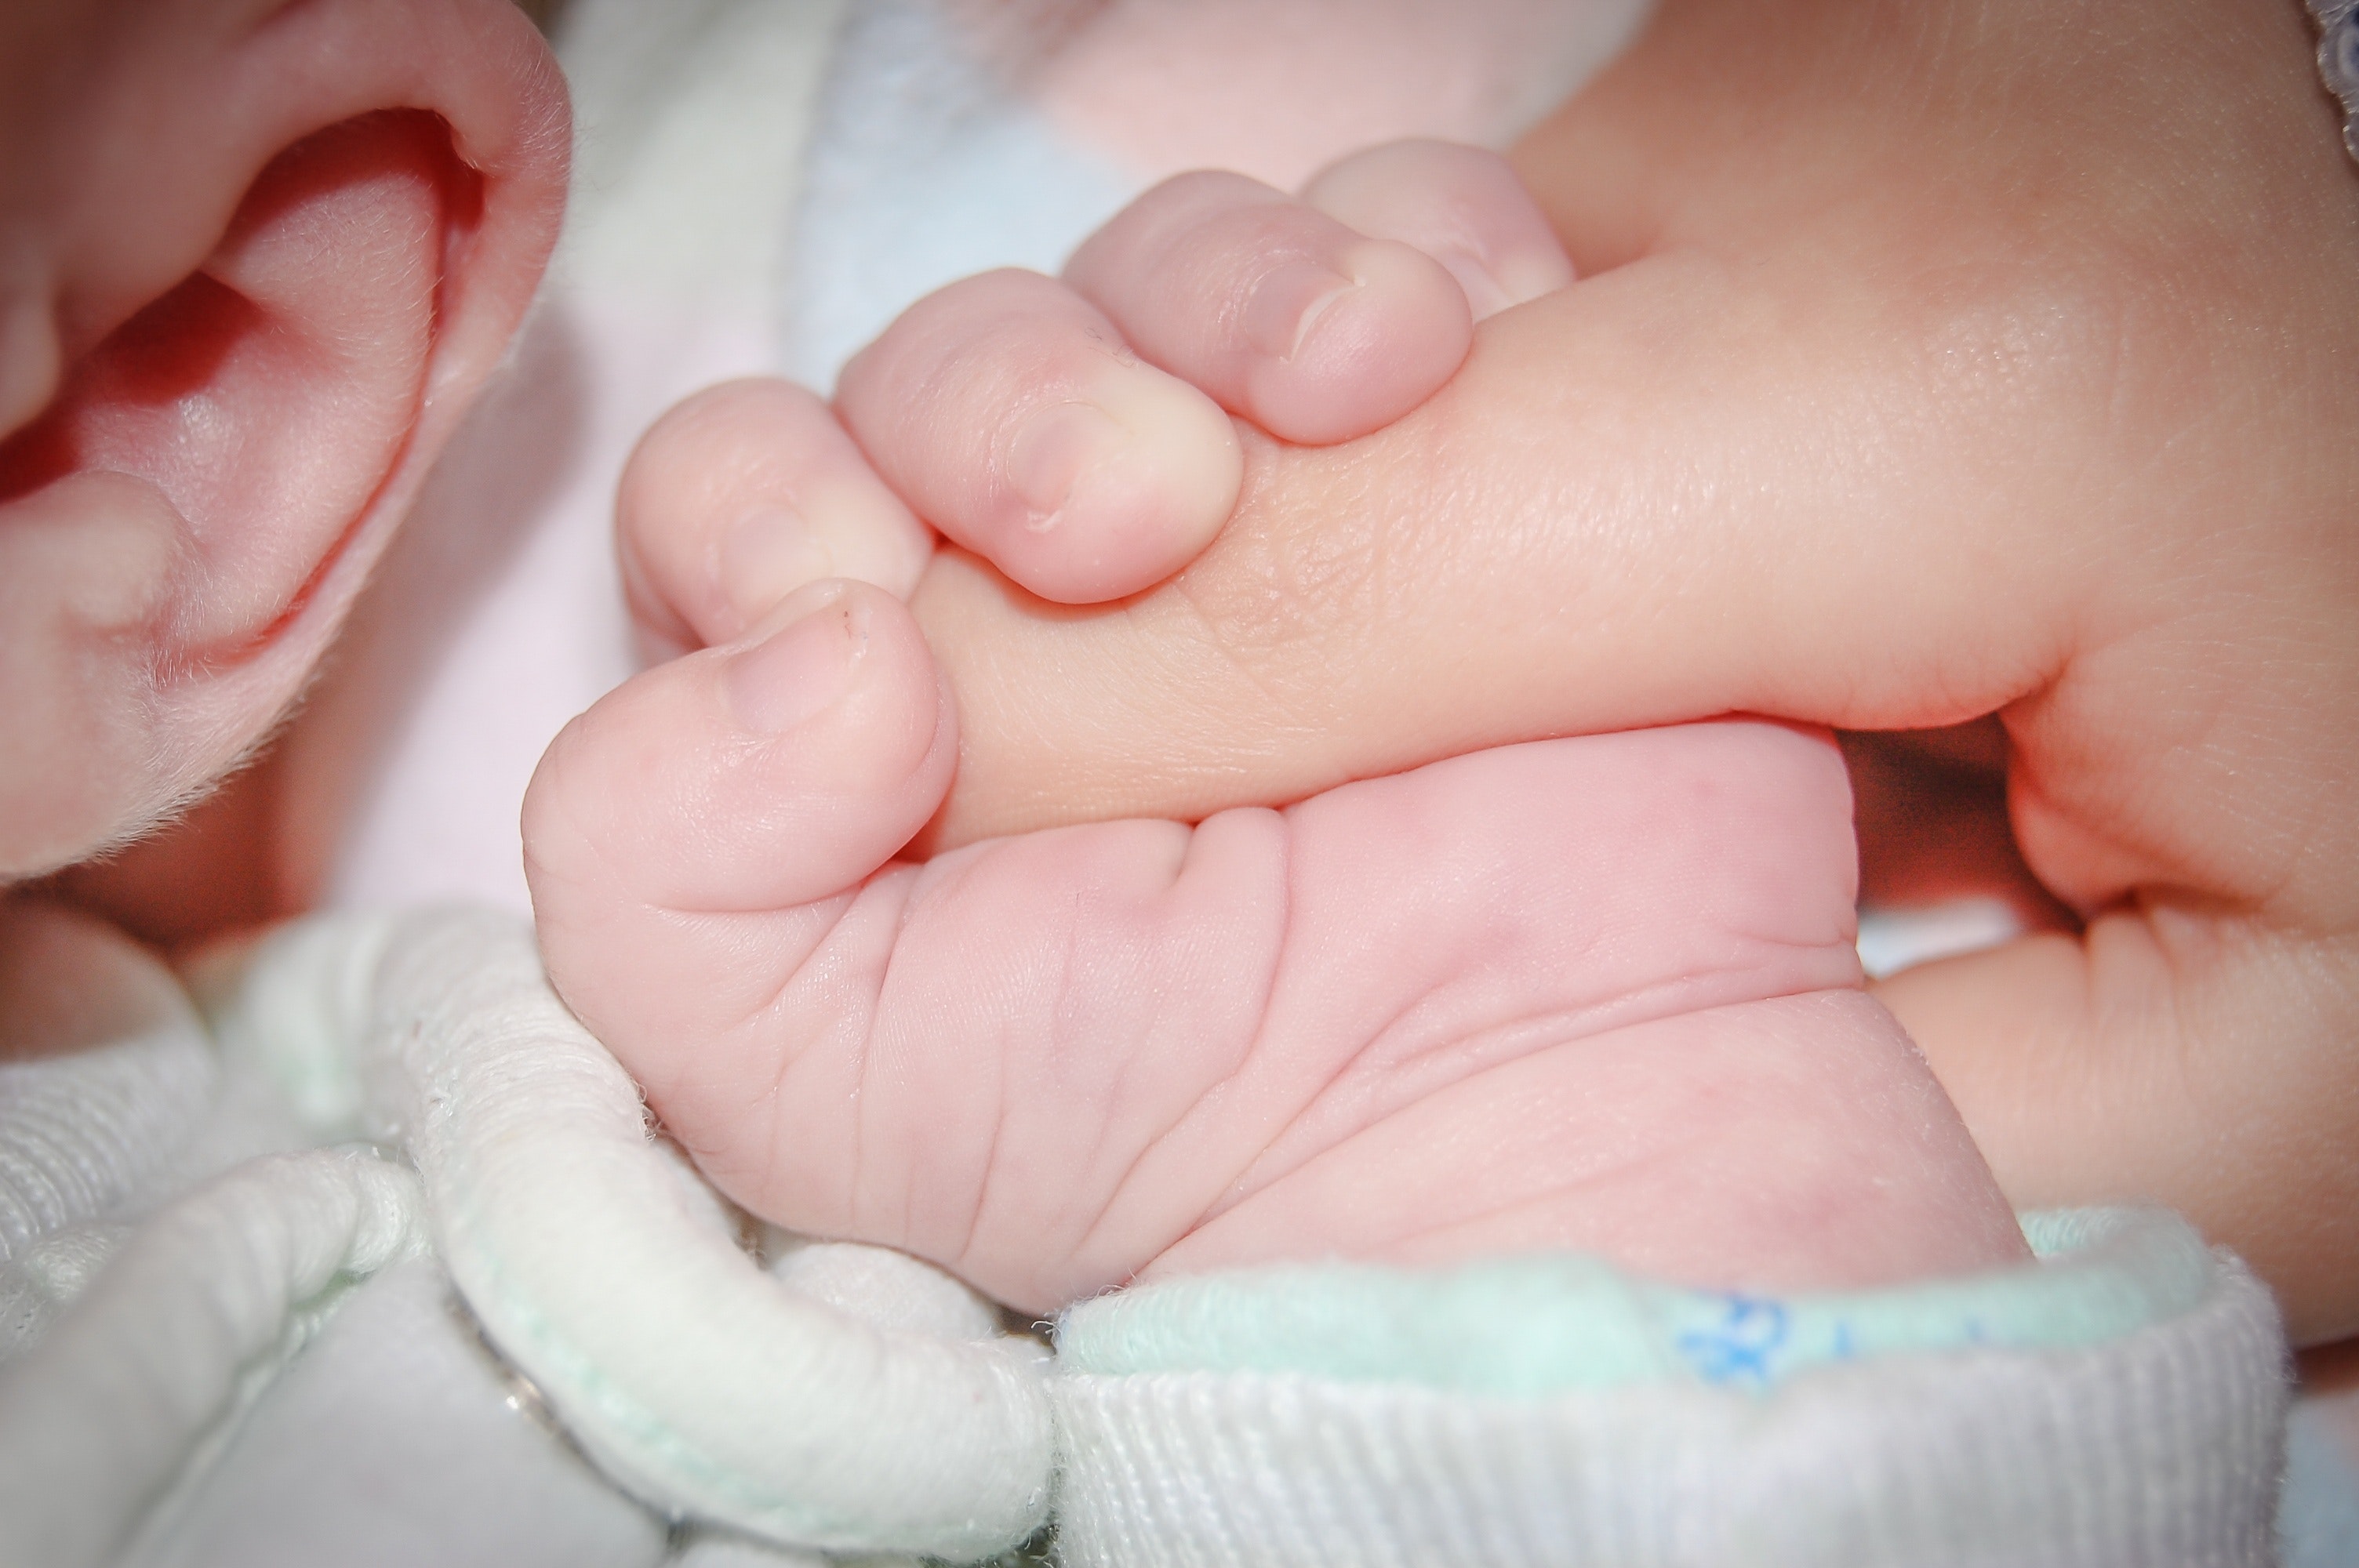 Baby Holding Human Index Finger, Baby, Child, Comfort, Contact, HQ Photo